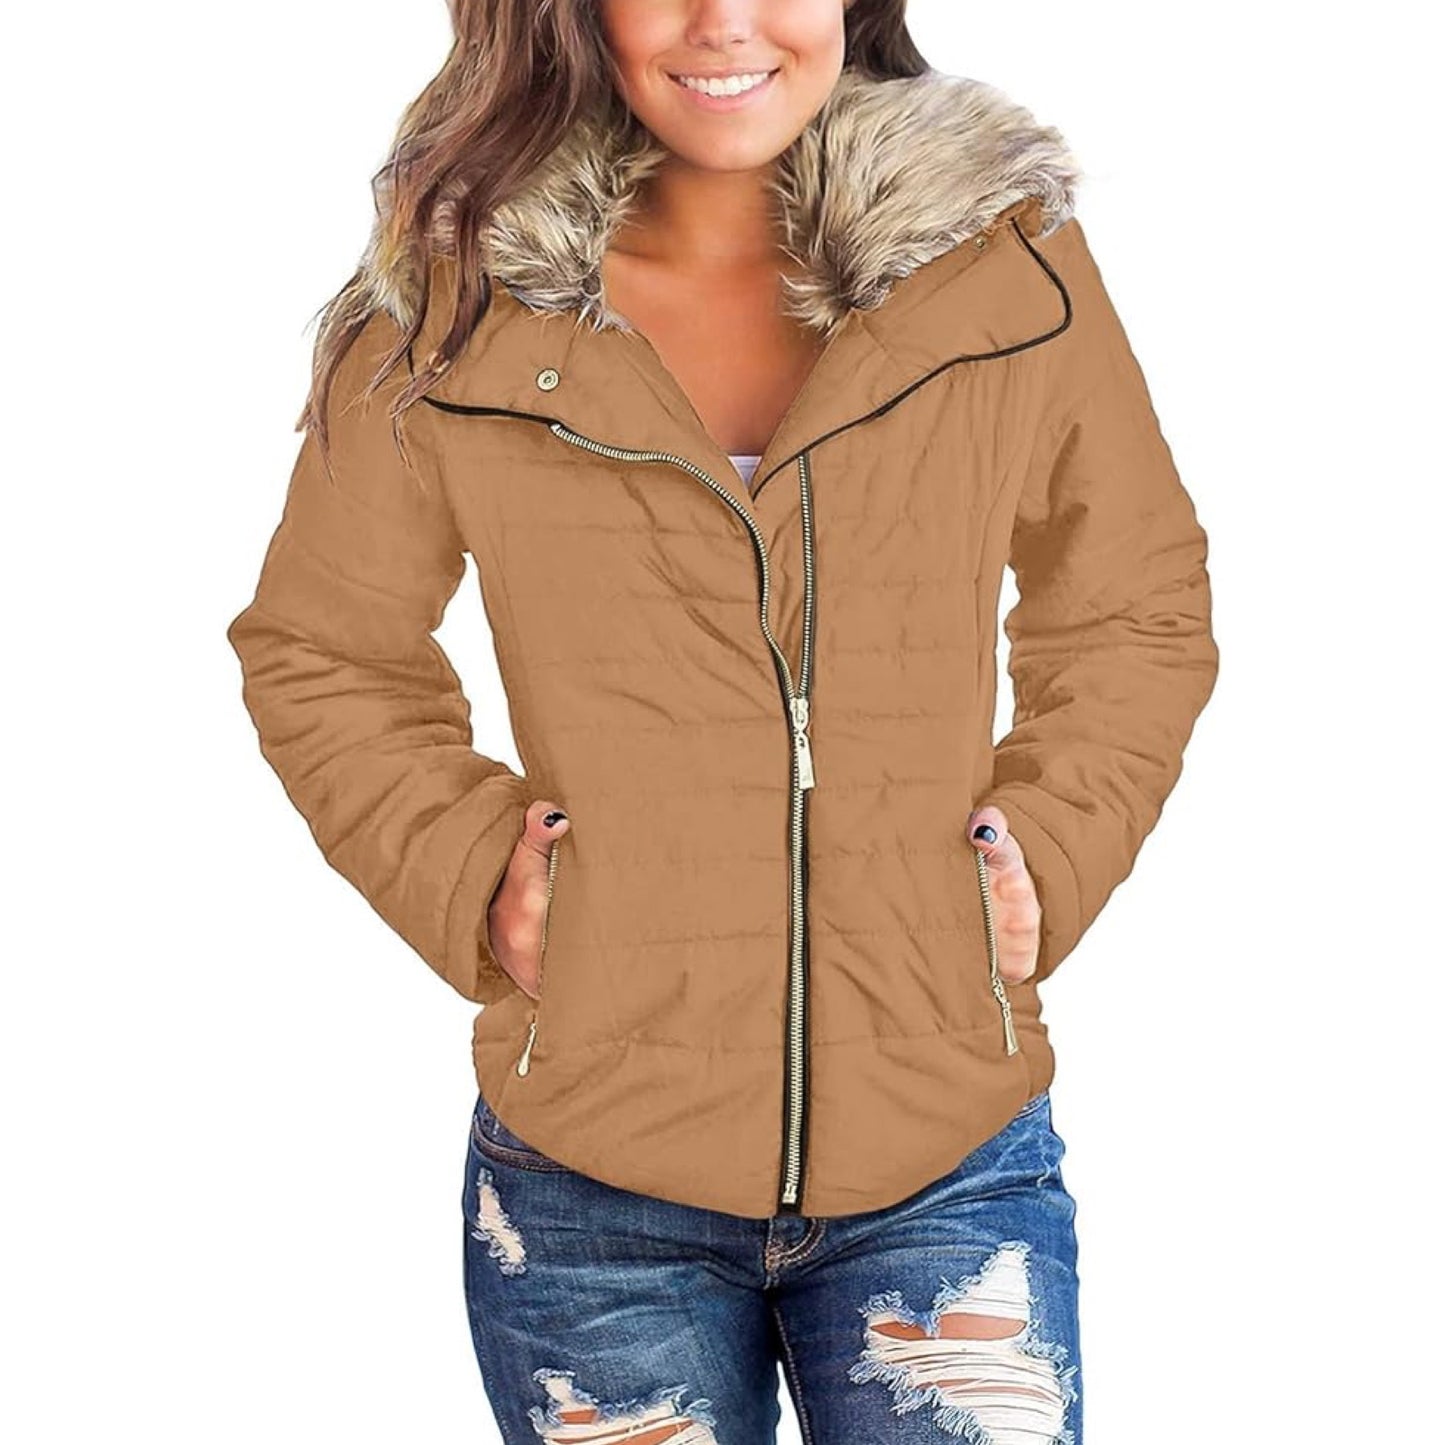 Women’s Casual Lapel Zip Pockets Quilted Parka Jacket Puffer Coat